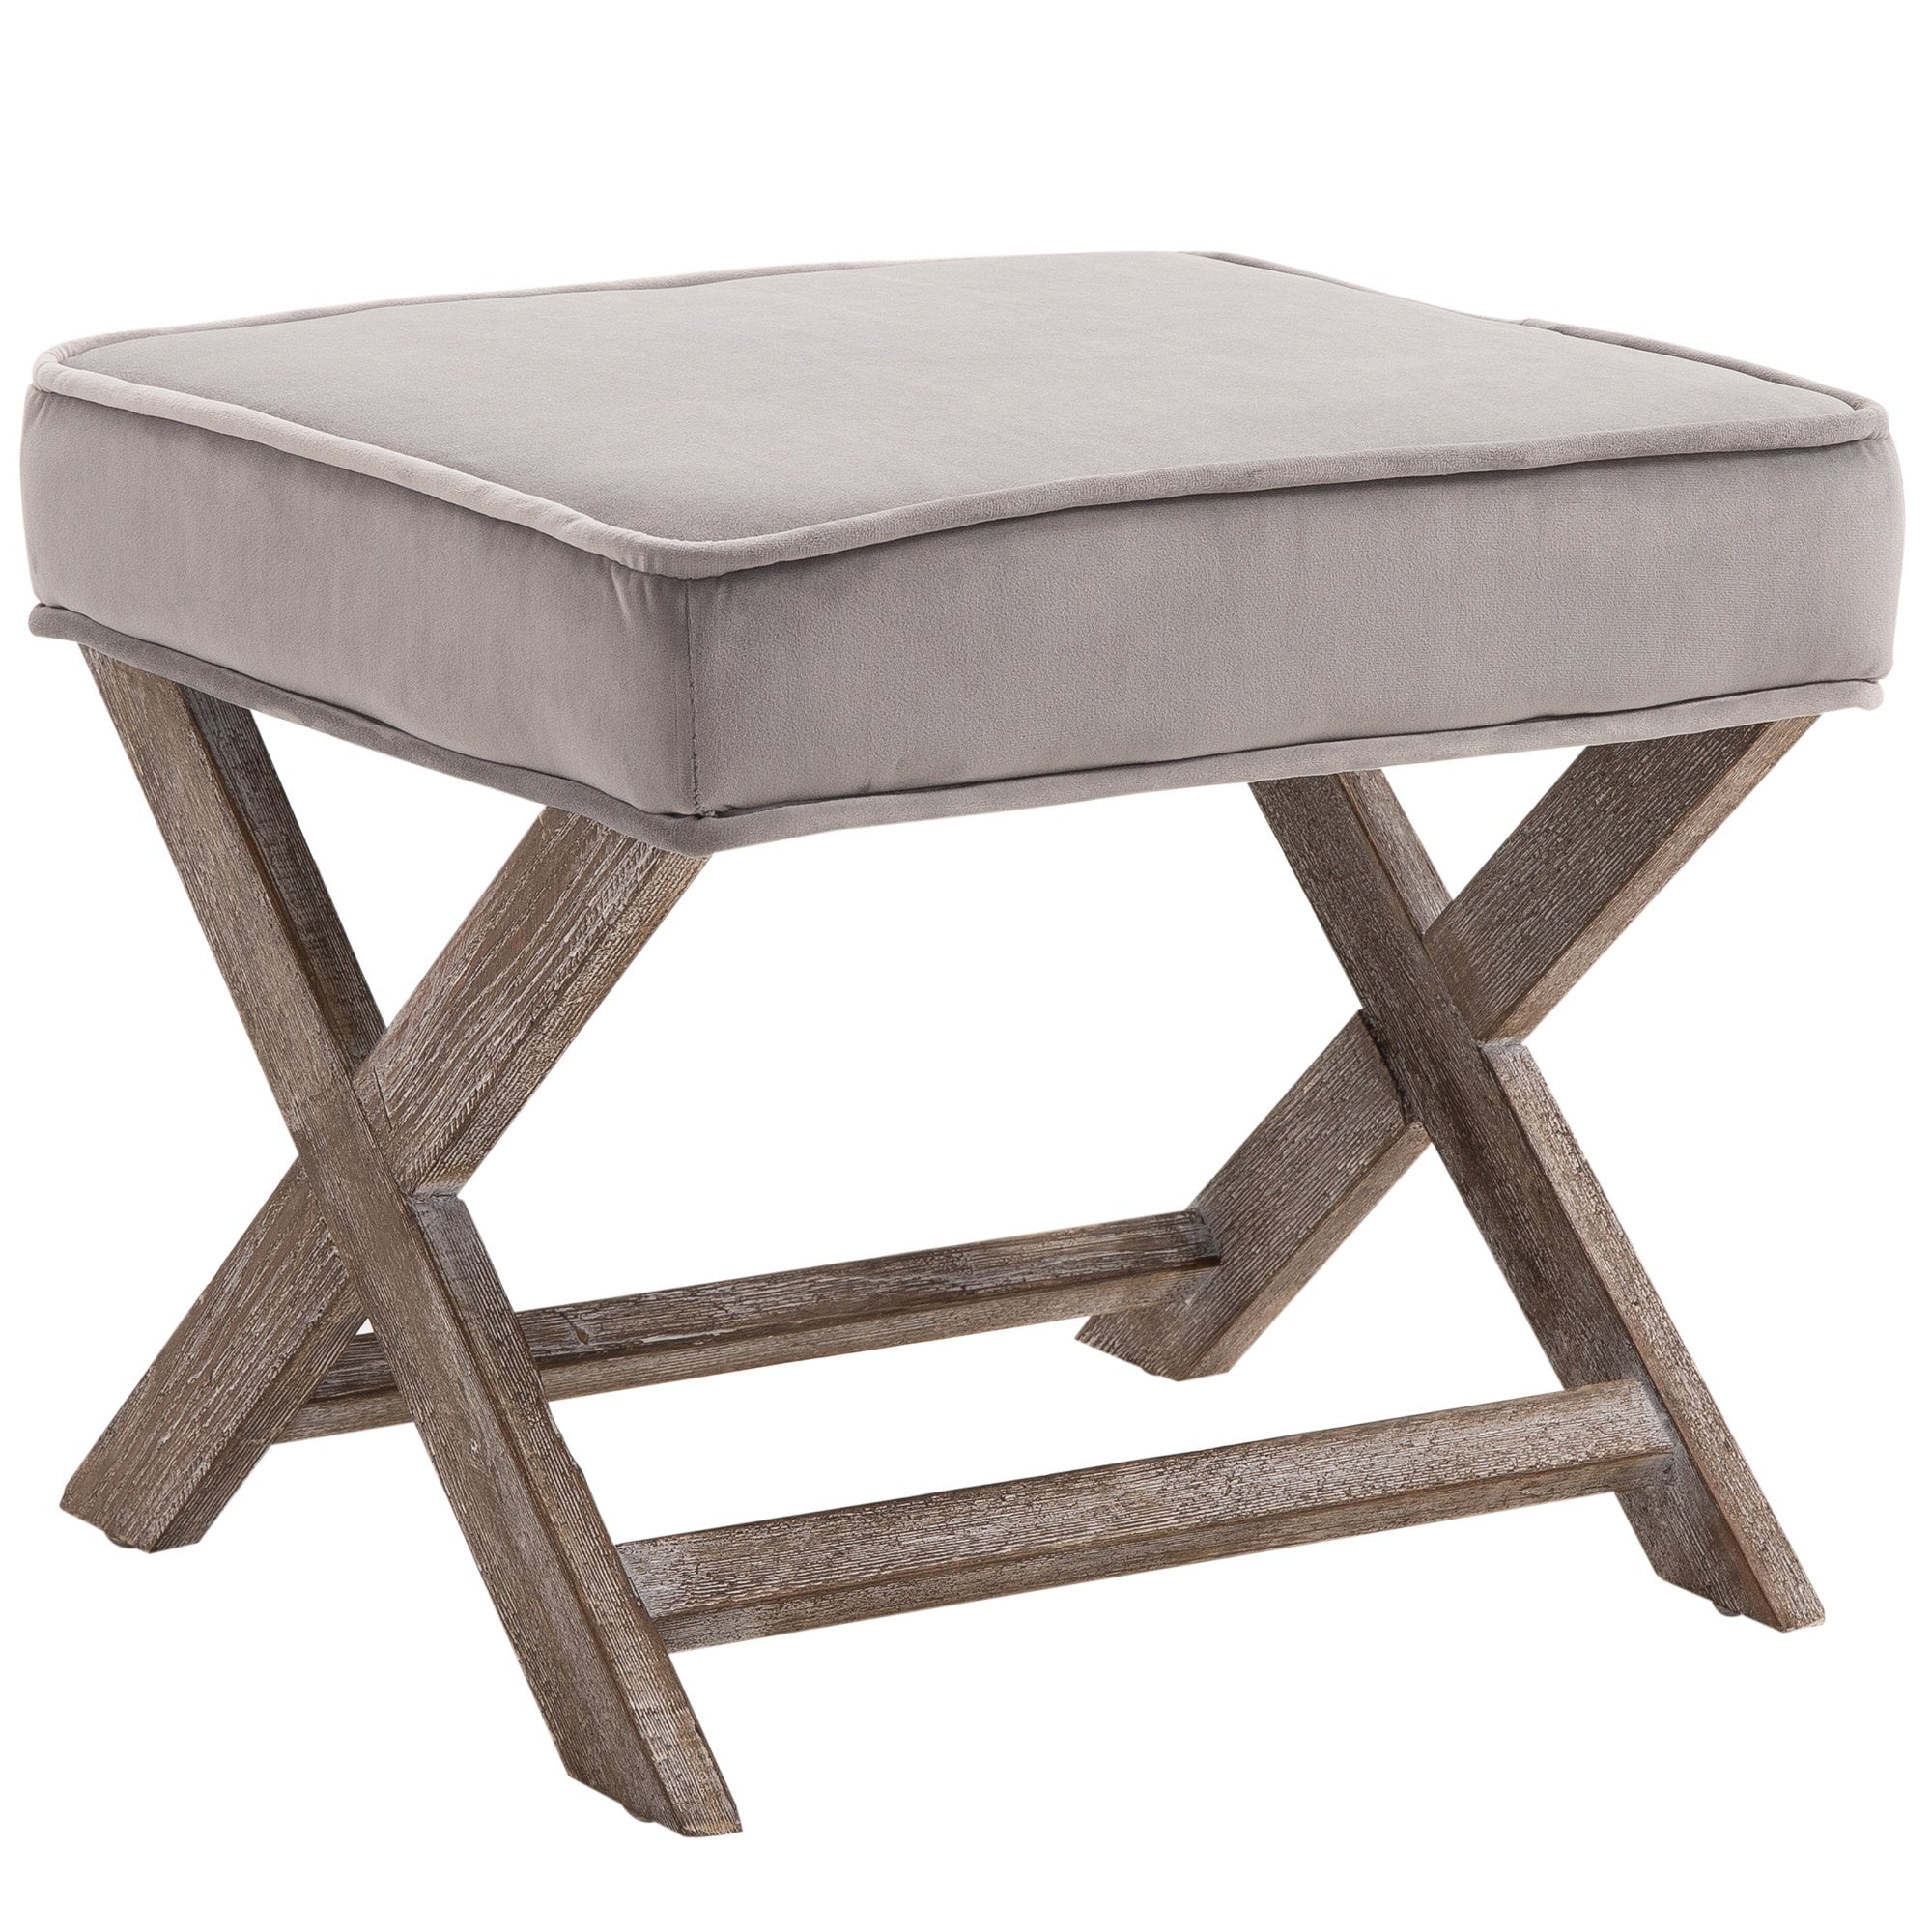 HOMCOM Vintage Footstool Padded Seat X Leg Chair Velvet Cover Shabby Chic Footrest Solid Rubber Wood 49.5 x 45 x 41 cm Grey  | TJ Hughes